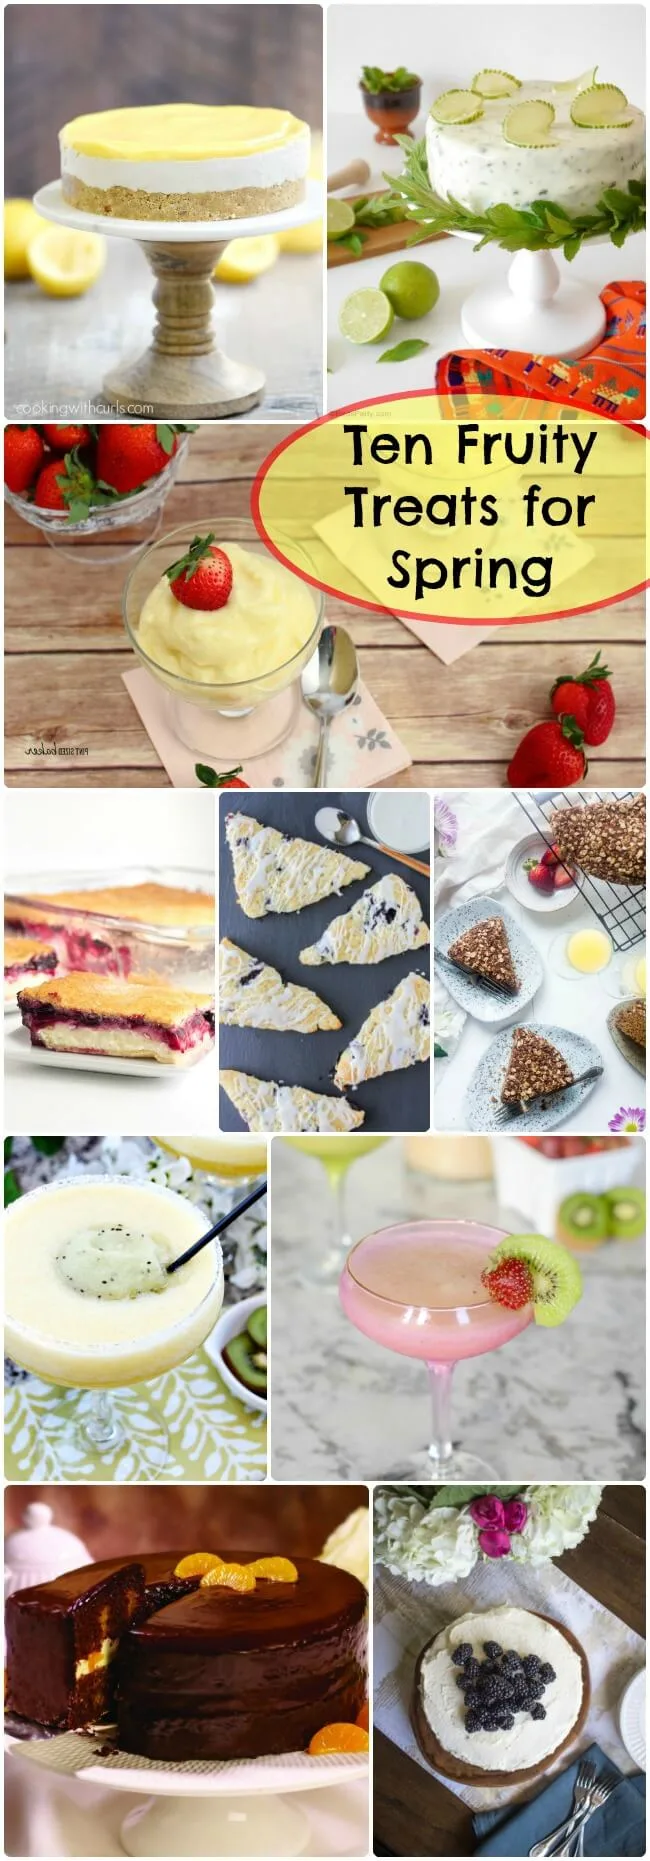 Spring time is all about baking with fresh fruits. Enjoy these Ten Fruity Treats for Spring Baking.